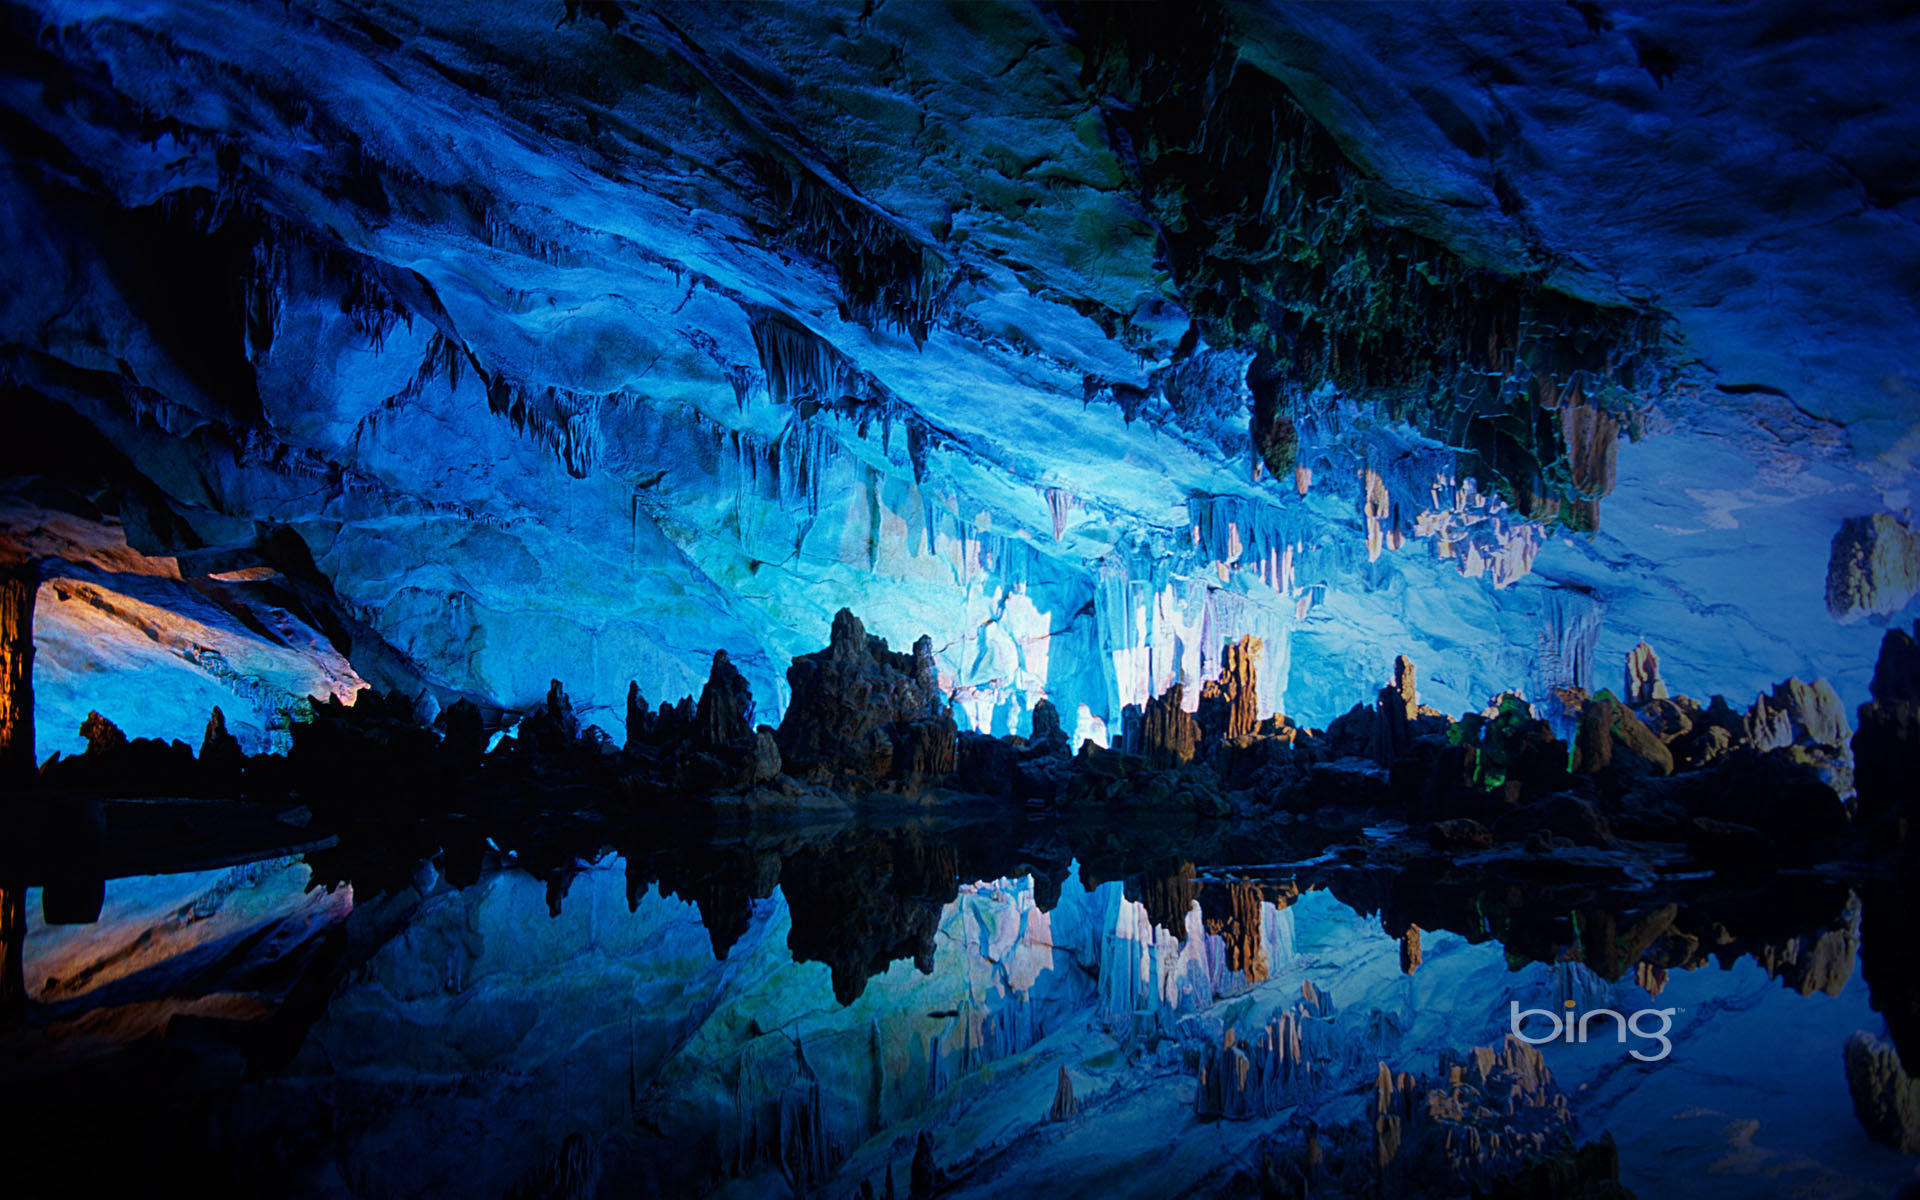 Reed Flute Cave Hd Wallpaper Background Image 1920x1200 Wallpaper